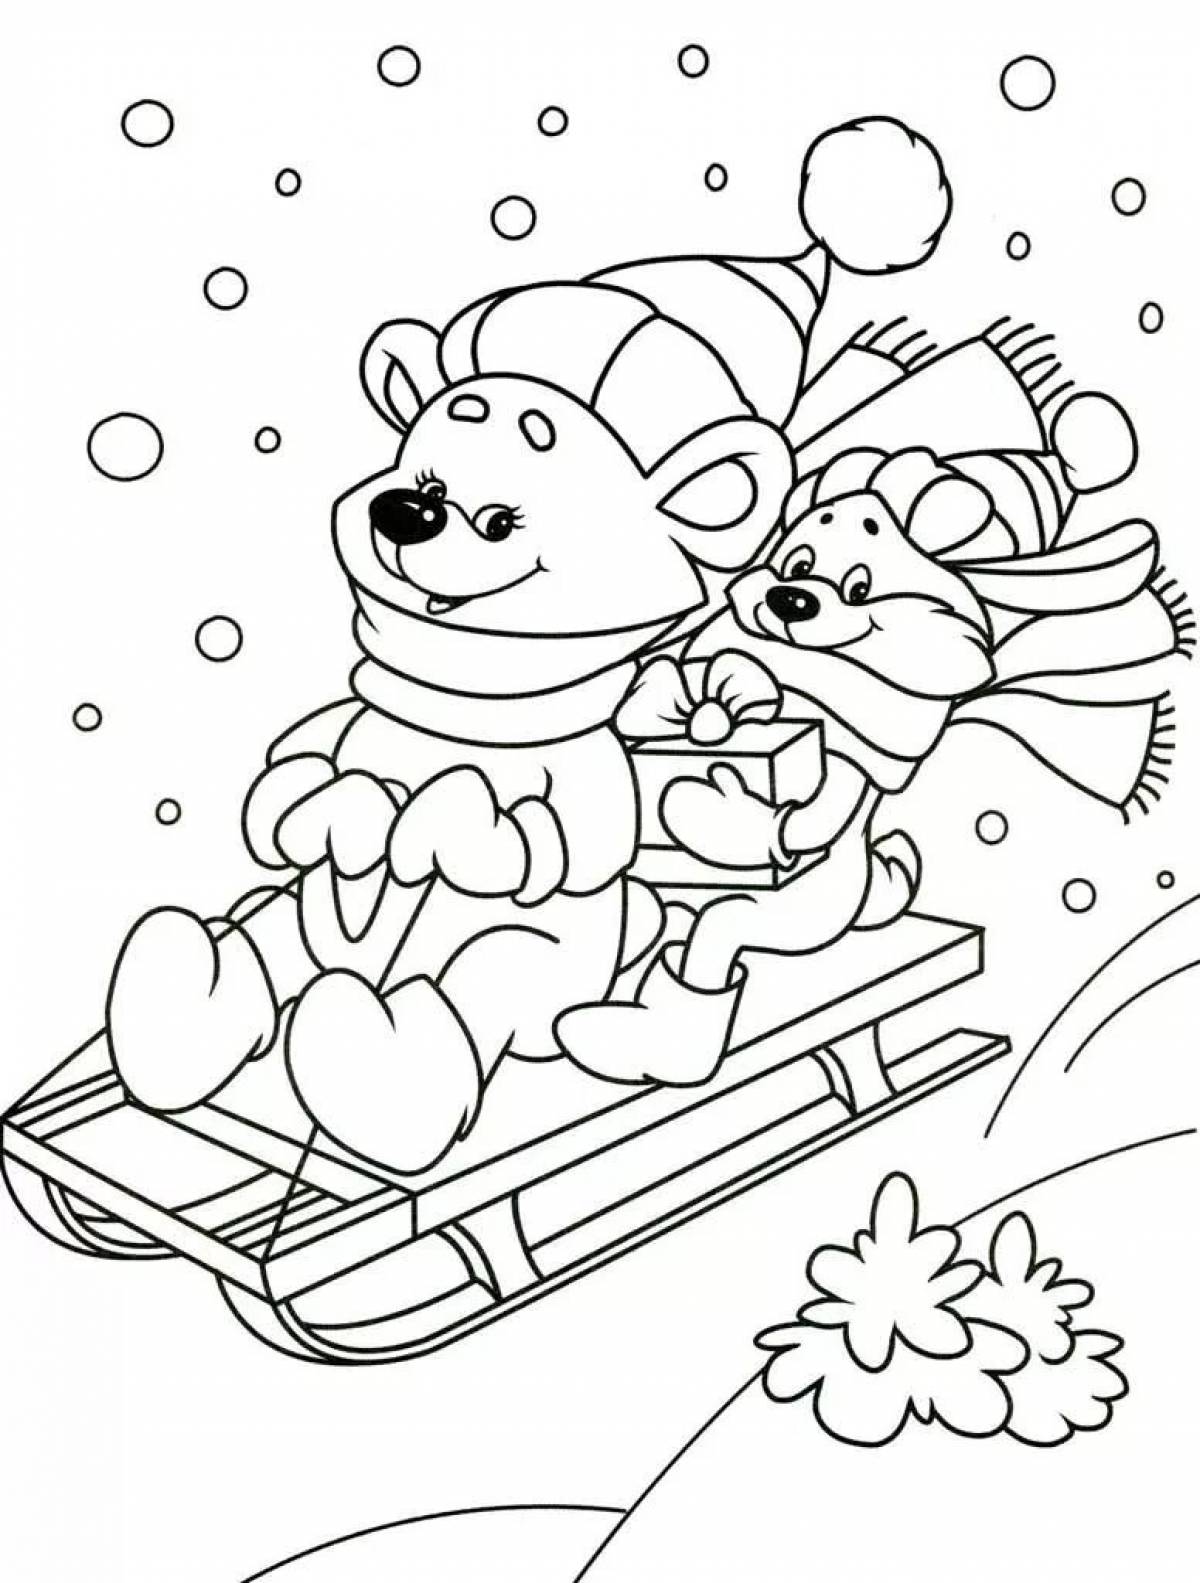 Extravagant Christmas coloring book